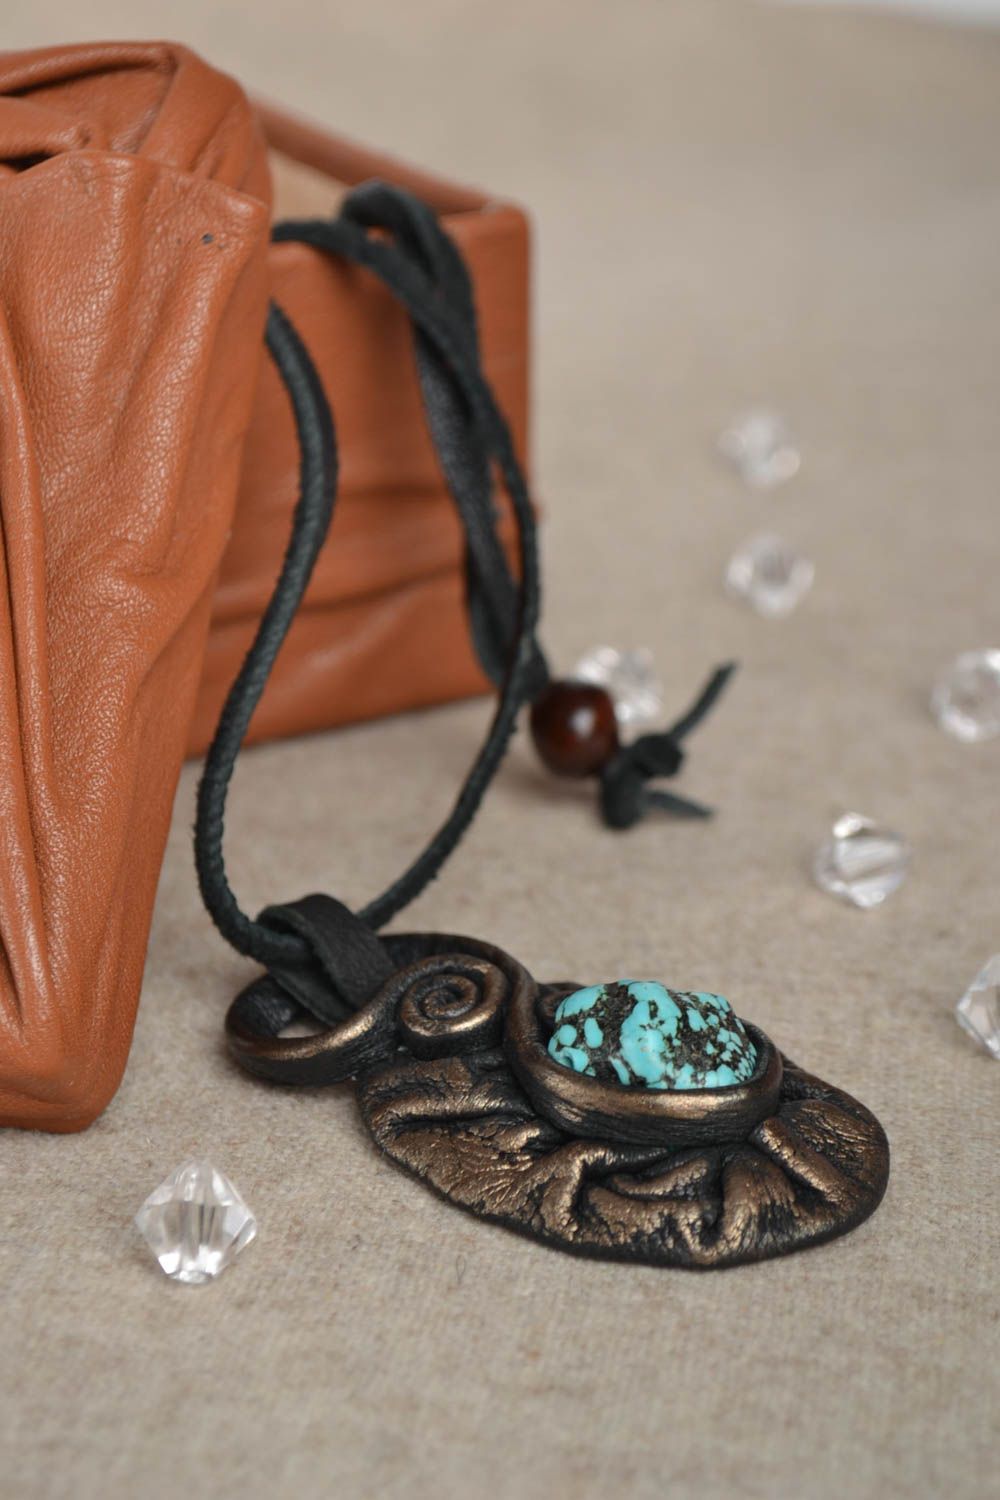 Necklace made of leather with turquoise pendant handmade leather jewelry photo 1